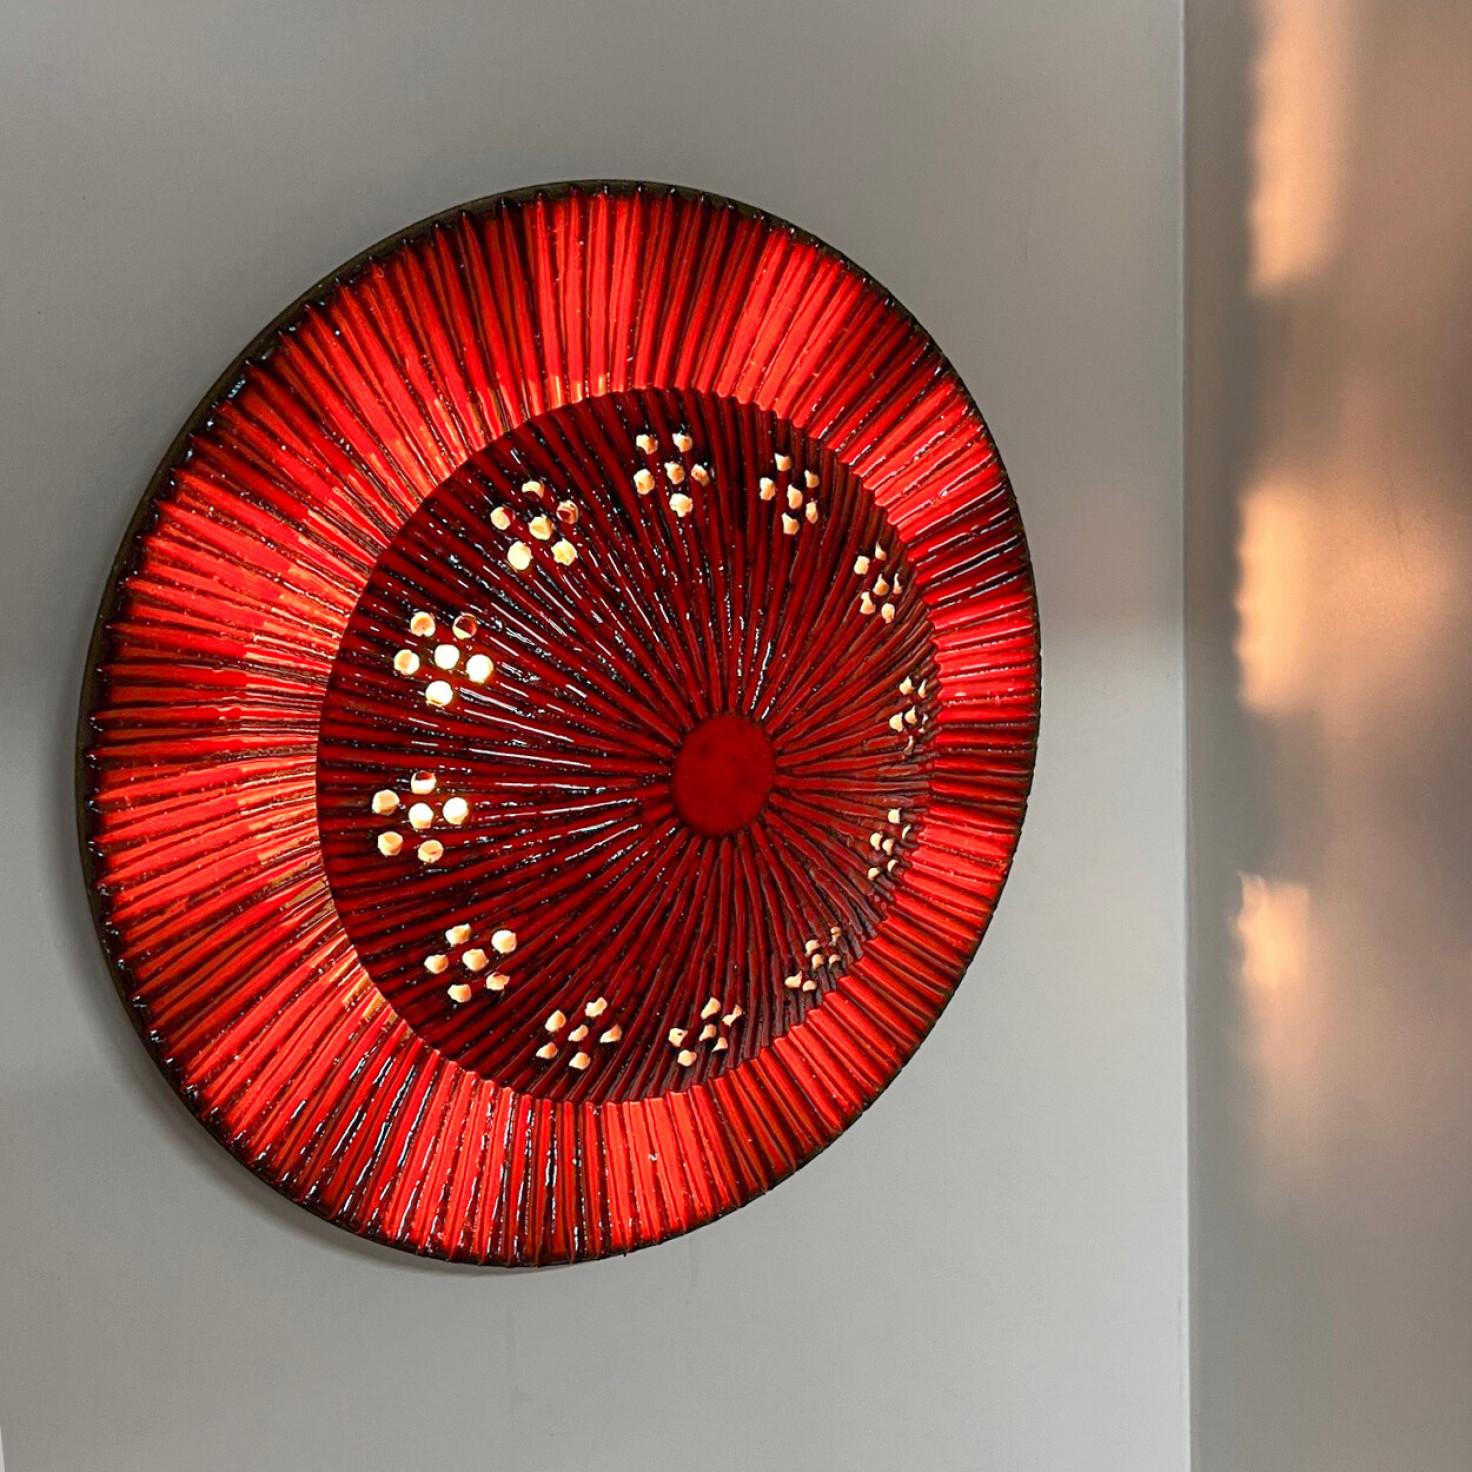 Spectacular red circular ceramic wall lights , with beautiful black accents. Manufactured in Denmark in the 1970s.

A unique statement piece.

Labelled and signed by Axella, in excellent condition. Axella was found in the 70s in Denmark by Aksel